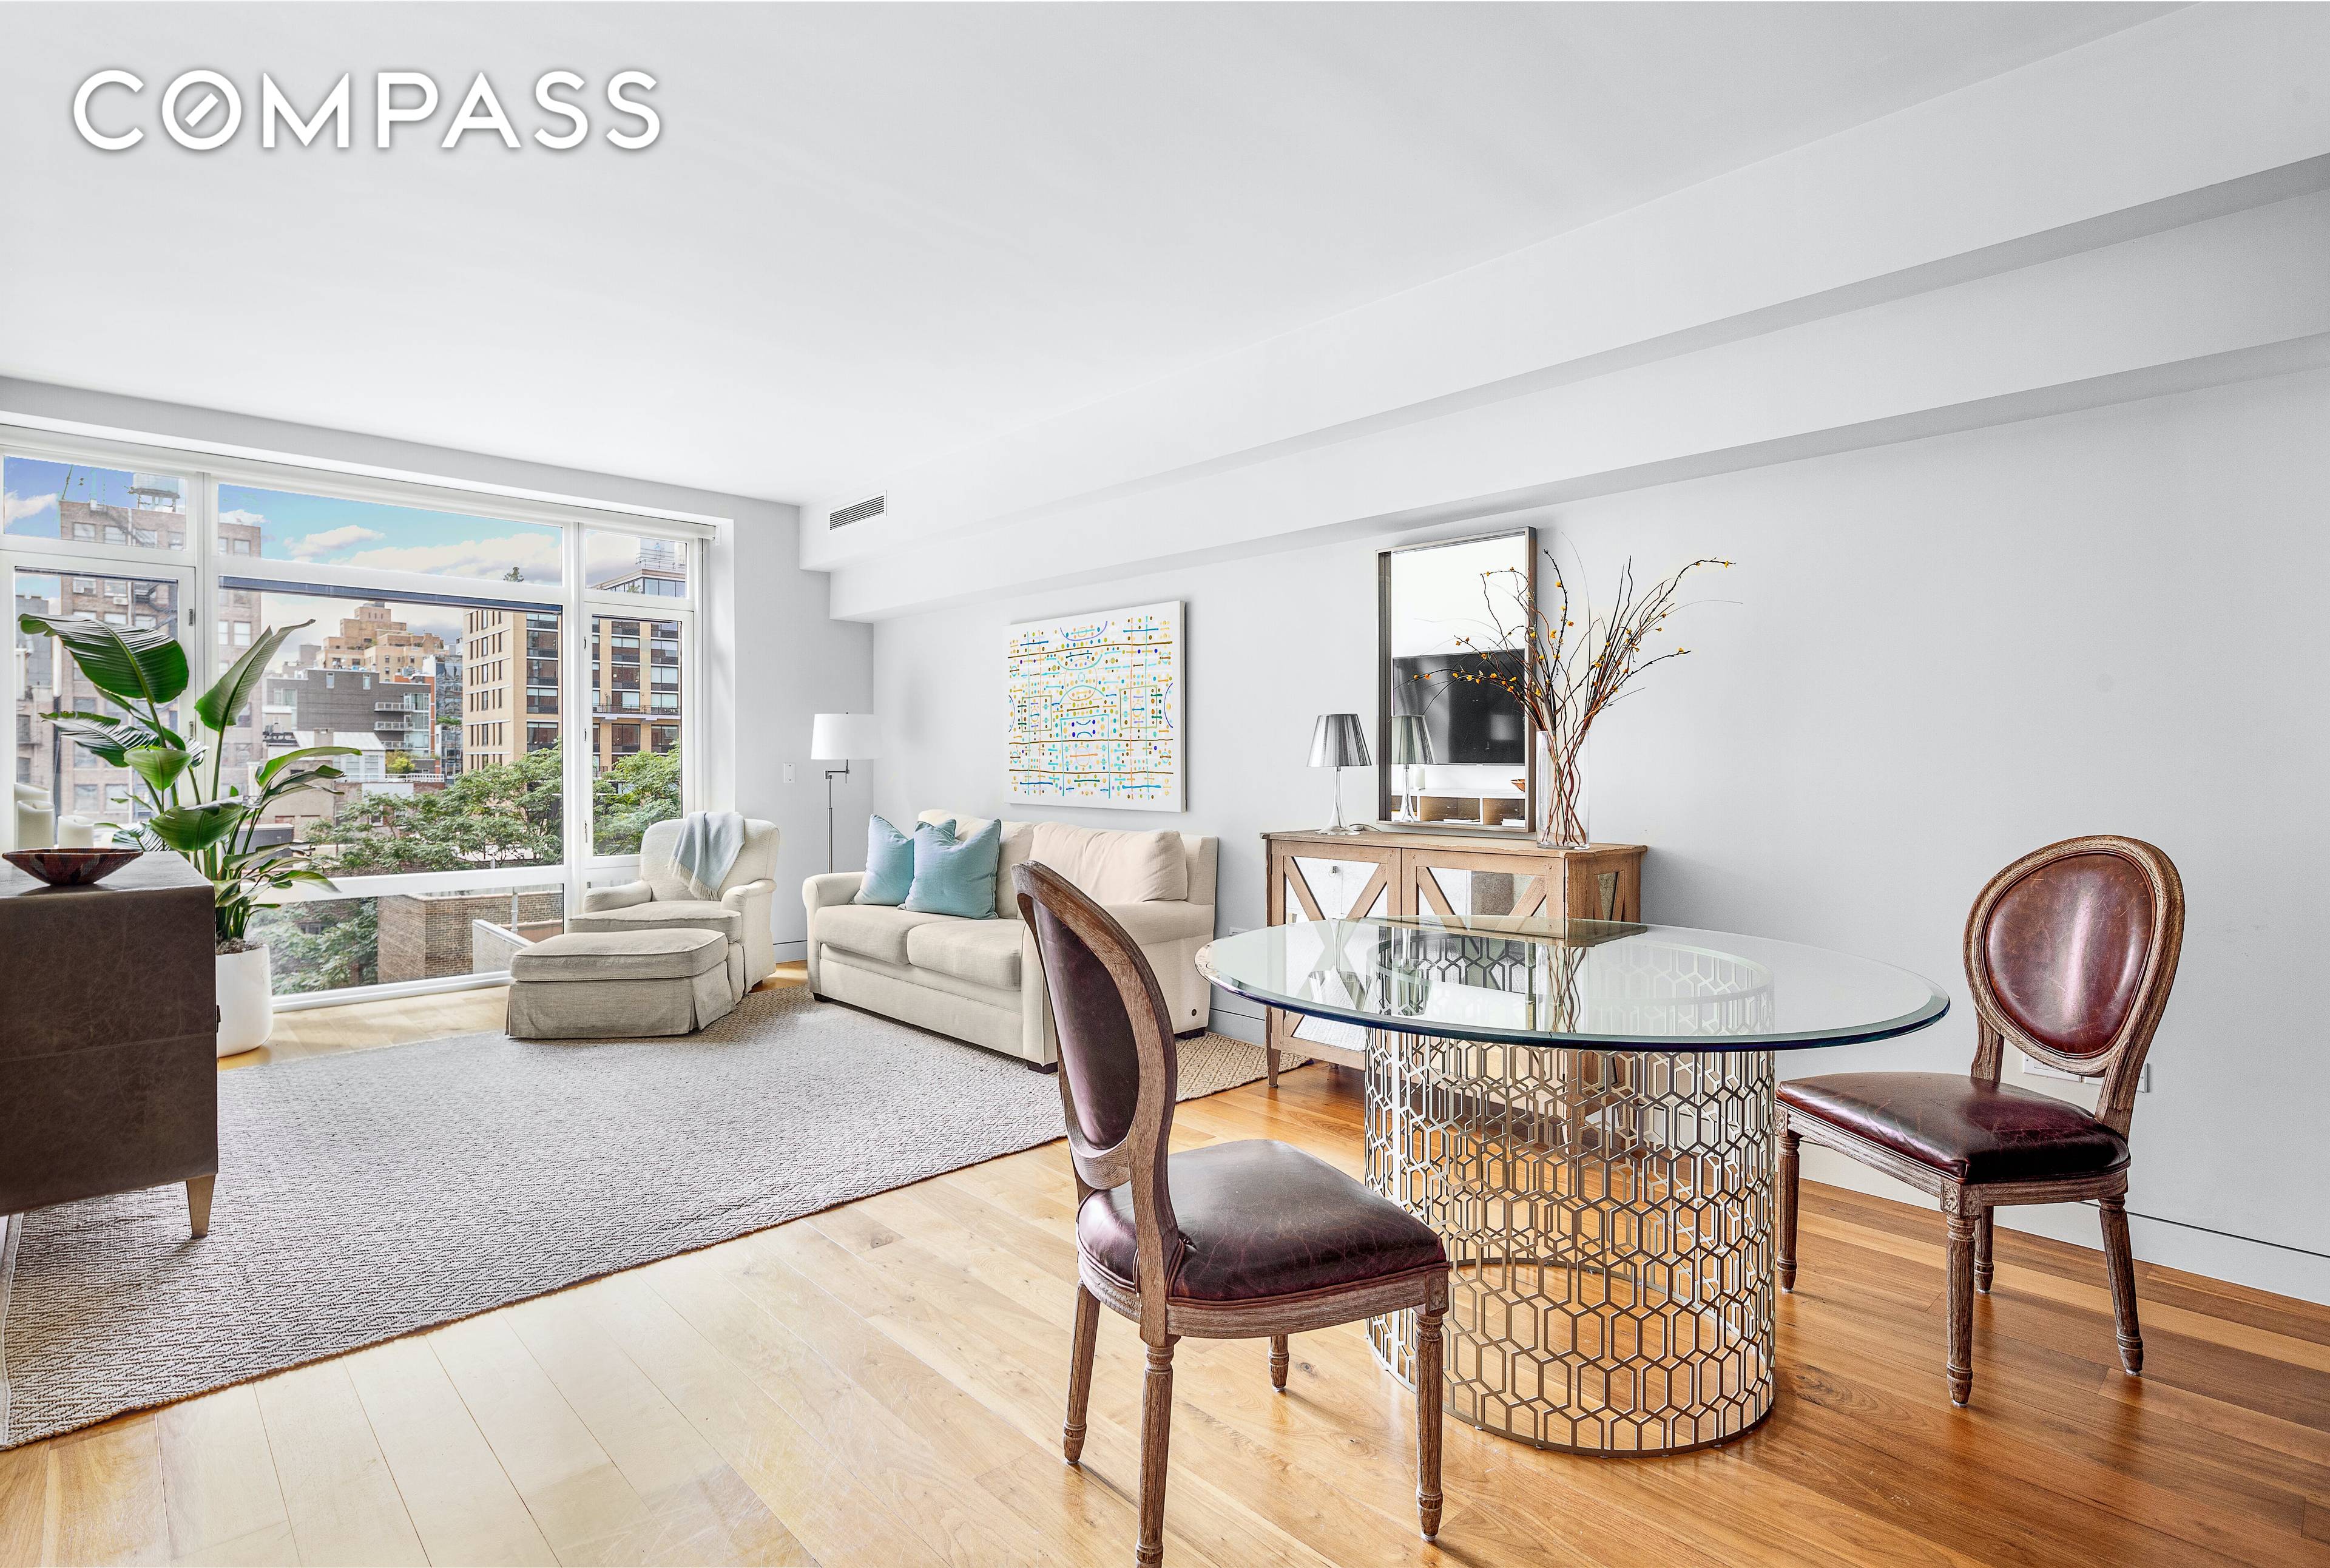 151 West 21st Street is ideally located on a charming tree lined block in the heart of Chelsea.